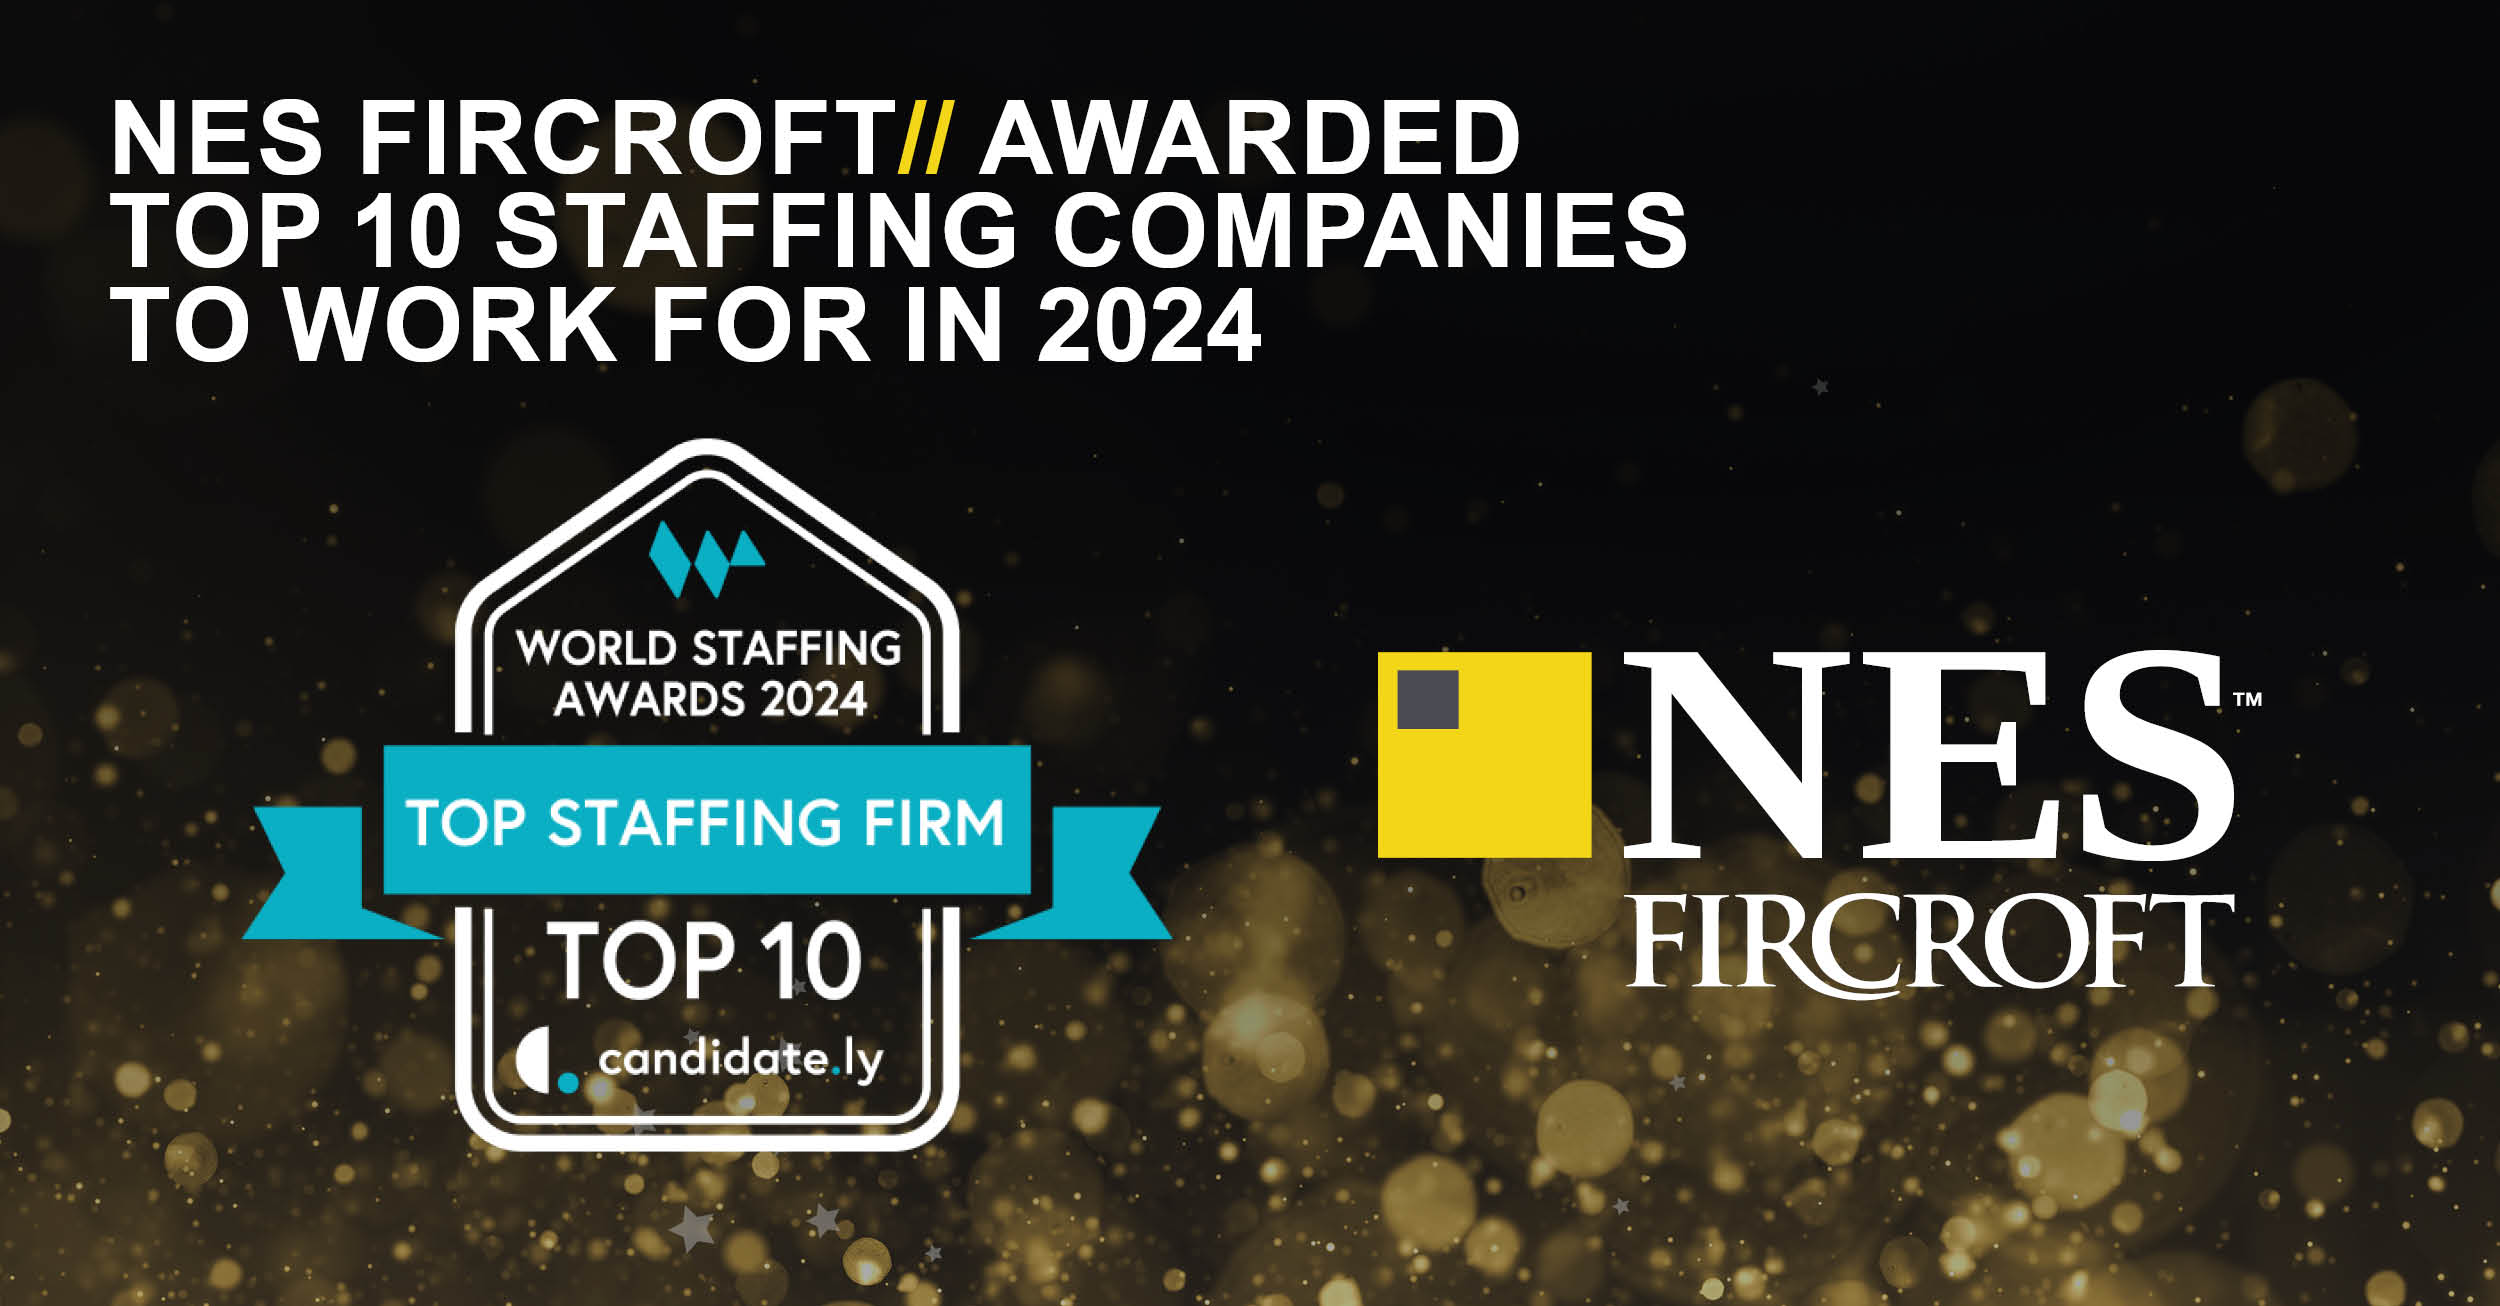 NES Fircroft named Top 10 Staffing Company to work for in 2024!